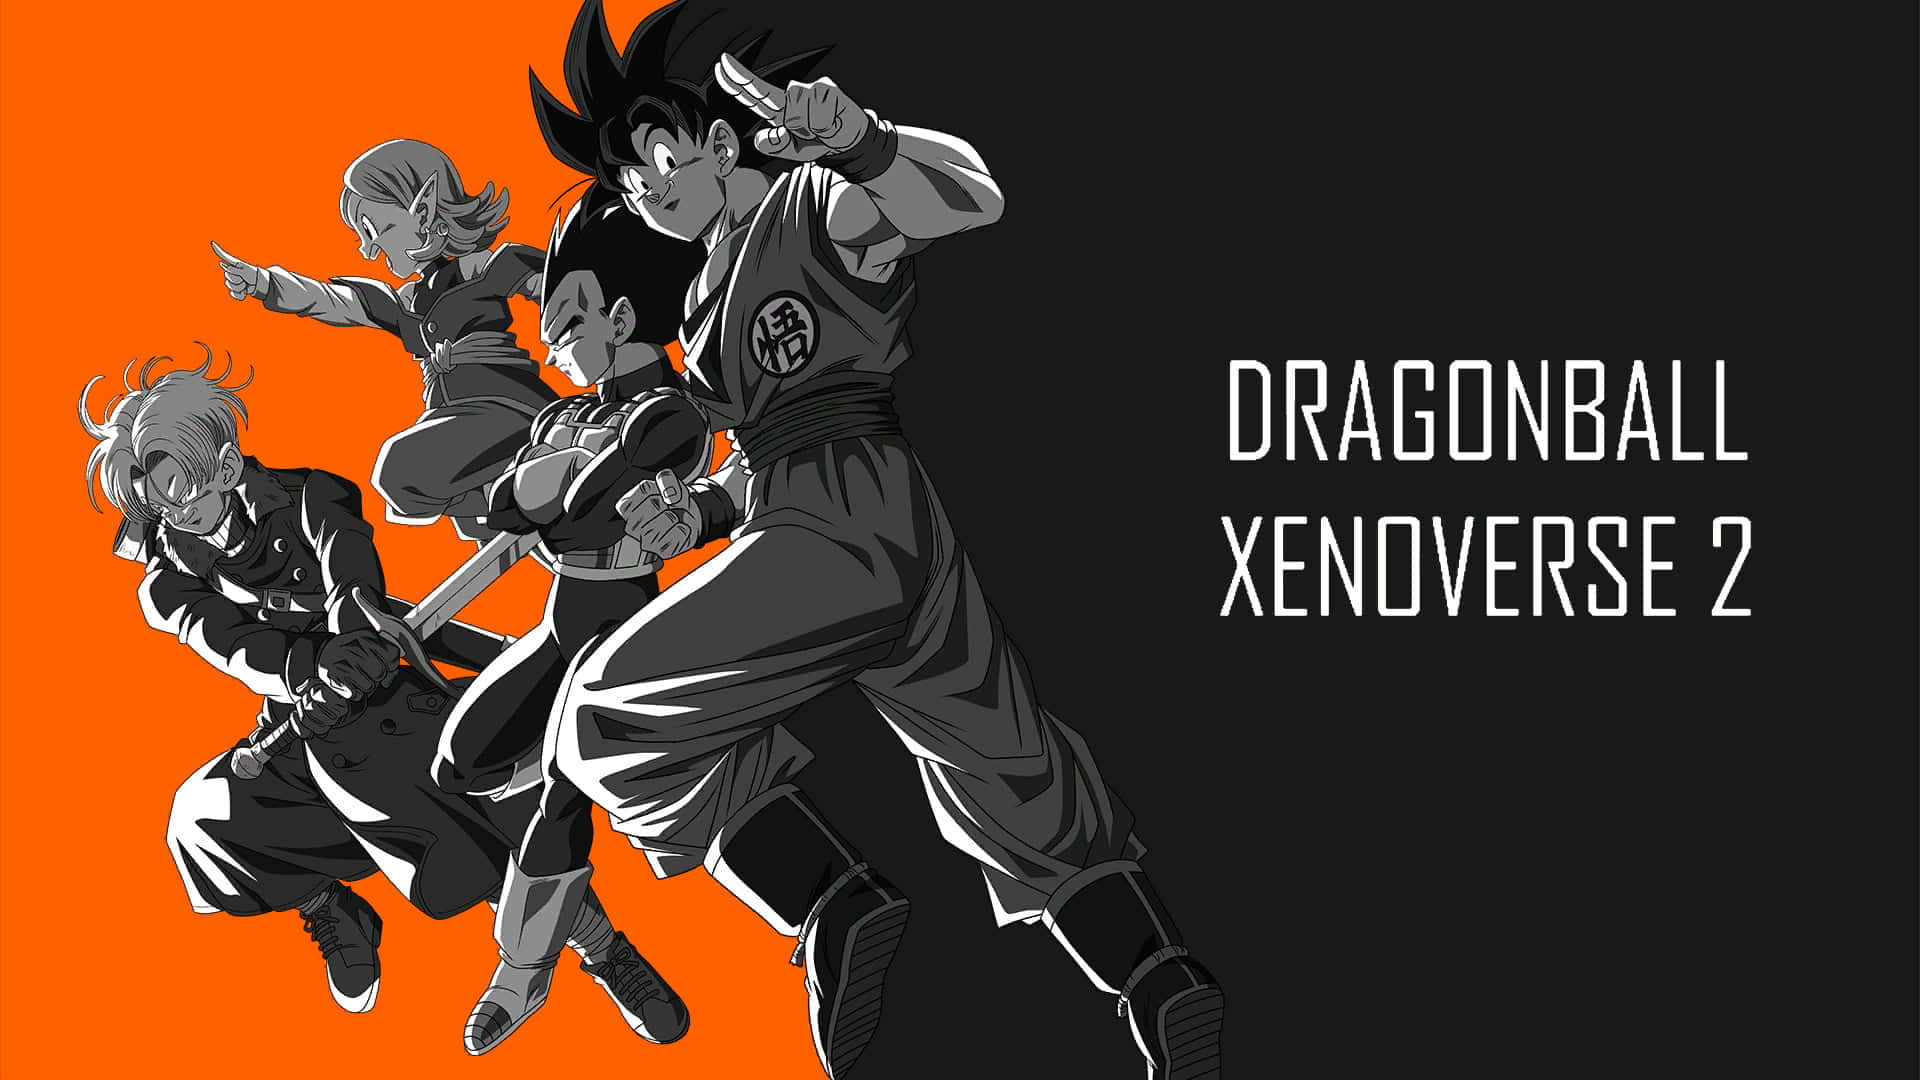 Gamers, Get Ready for Action with Dragon Ball Xenoverse Wallpaper